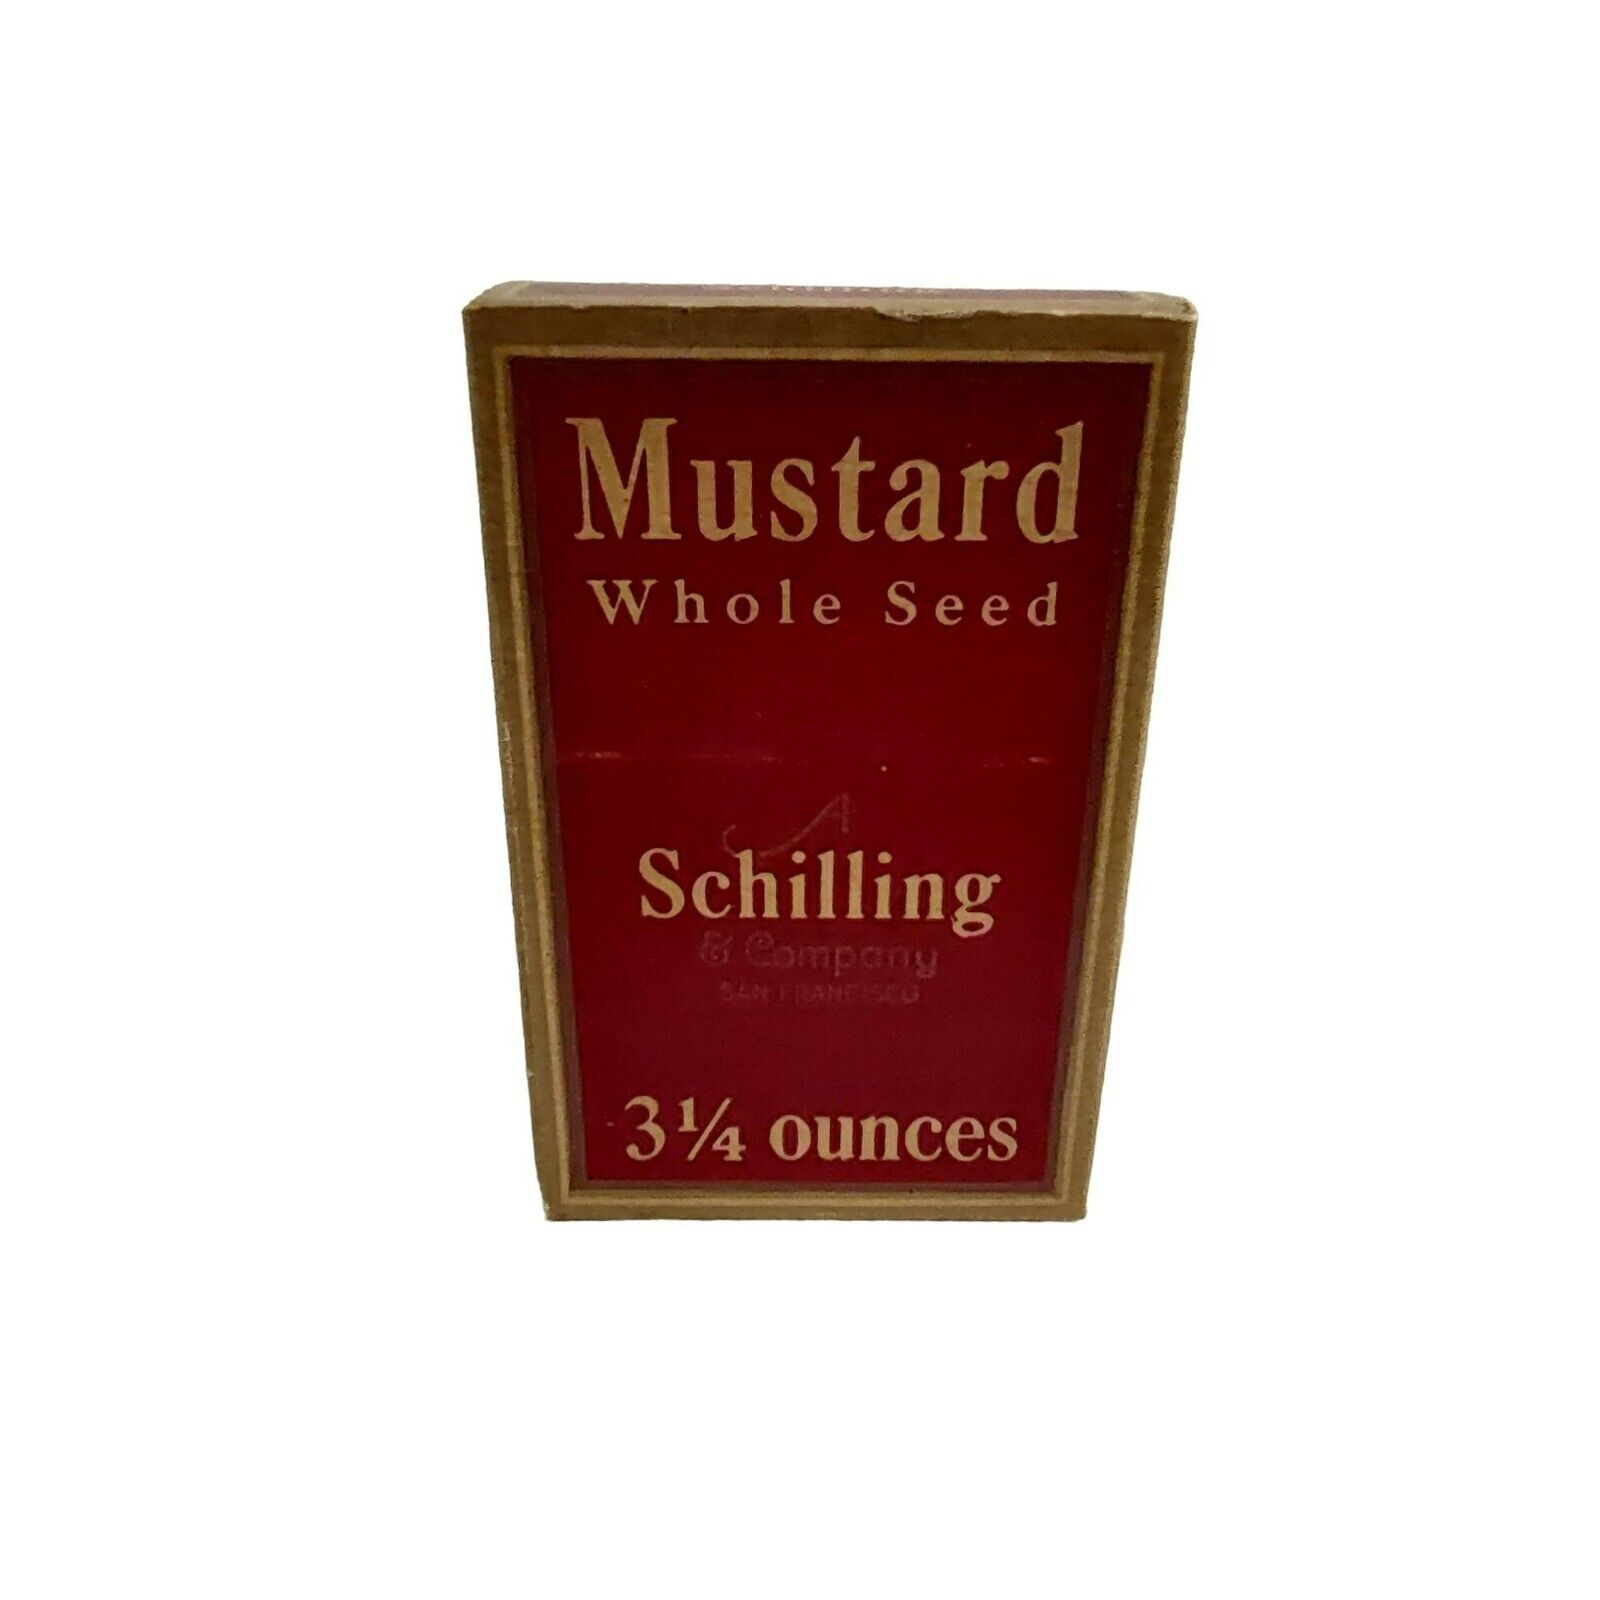 Primary image for 1933 A Schilling and Company Mustard Seed Cardboard Spice Box Red and Gold